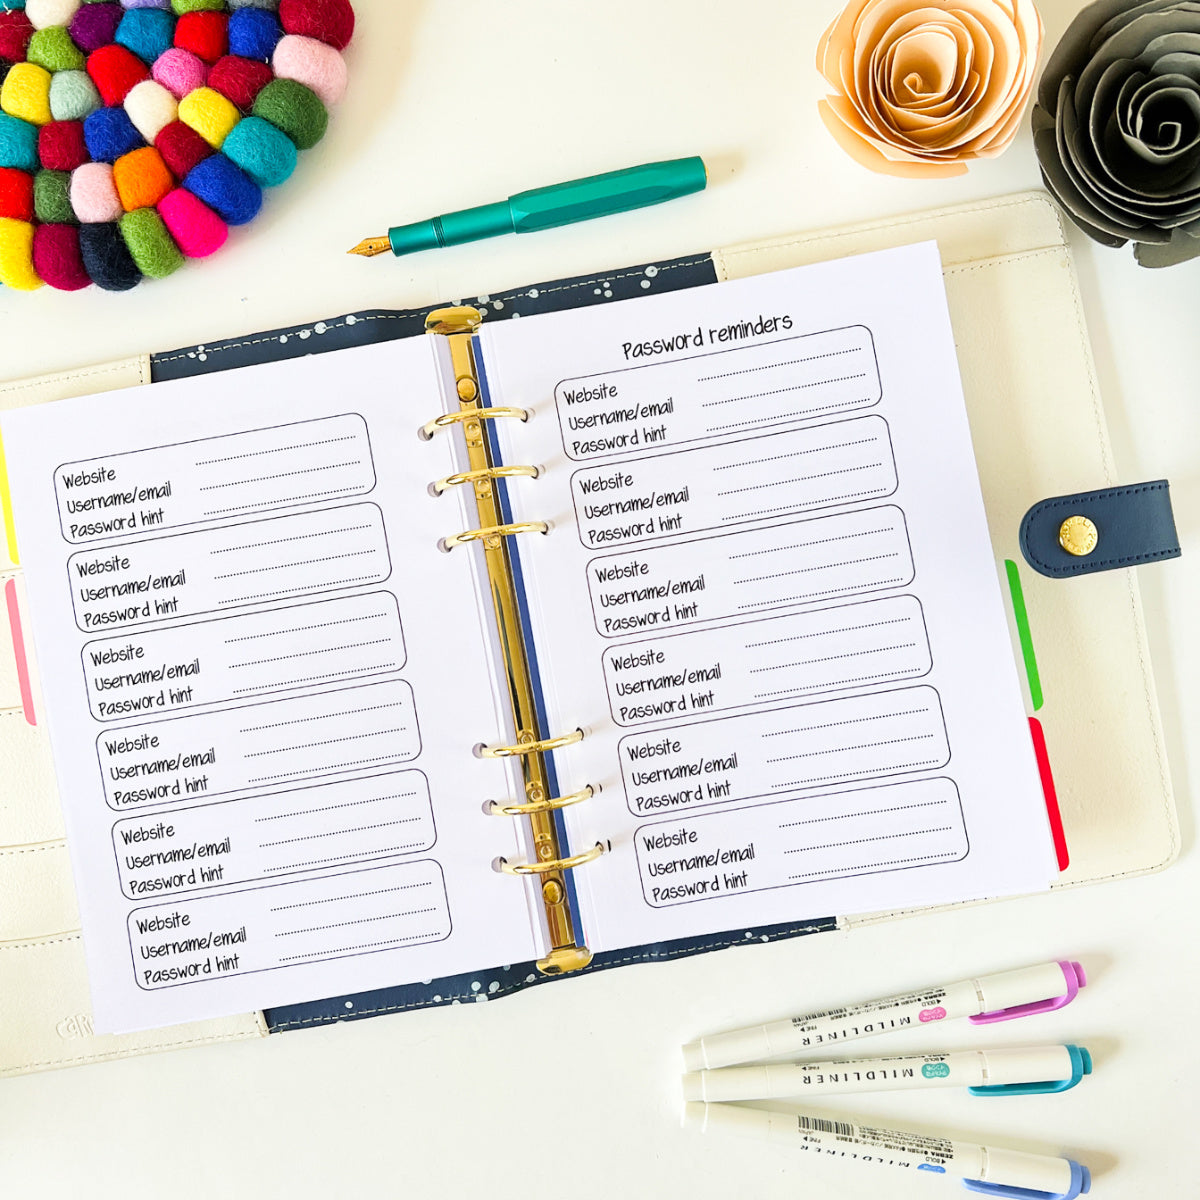 An open planner with a "Password Keeper" page doubles as the perfect password keeper, with sections for website, username/email, and password hints. Surrounding it are colorful accessories: a felt ball coaster, a gold paper flower, a pen, and highlighters.